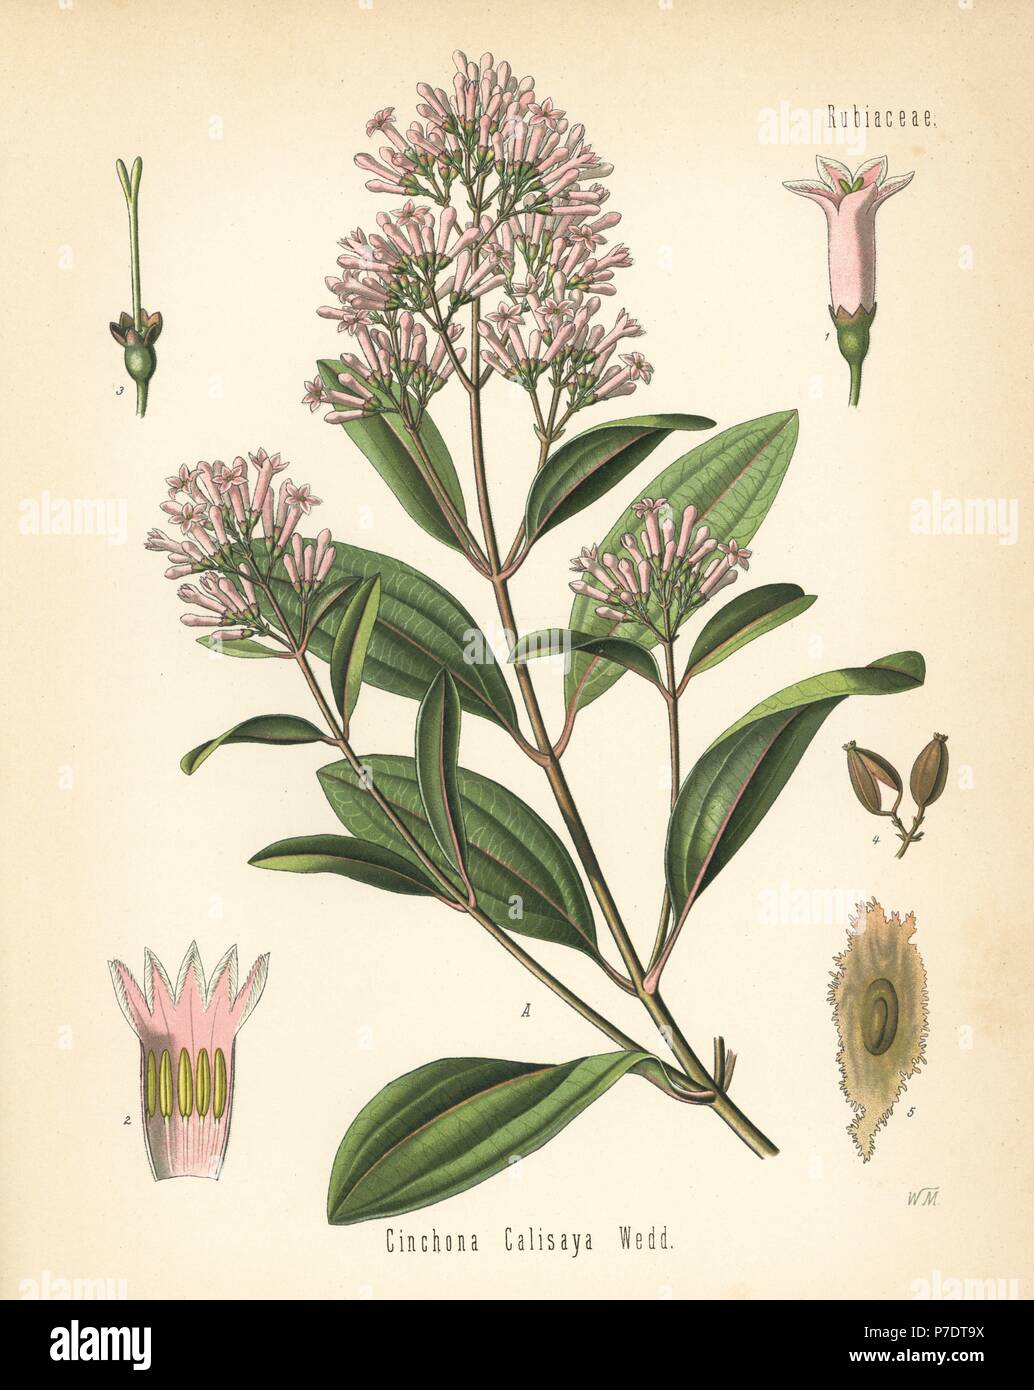 Quina, Cinchona calisaya. Chromolithograph after a botanical illustration by Walther Muller from Hermann Adolph Koehler's Medicinal Plants, edited by Gustav Pabst, Koehler, Germany, 1887. Stock Photo